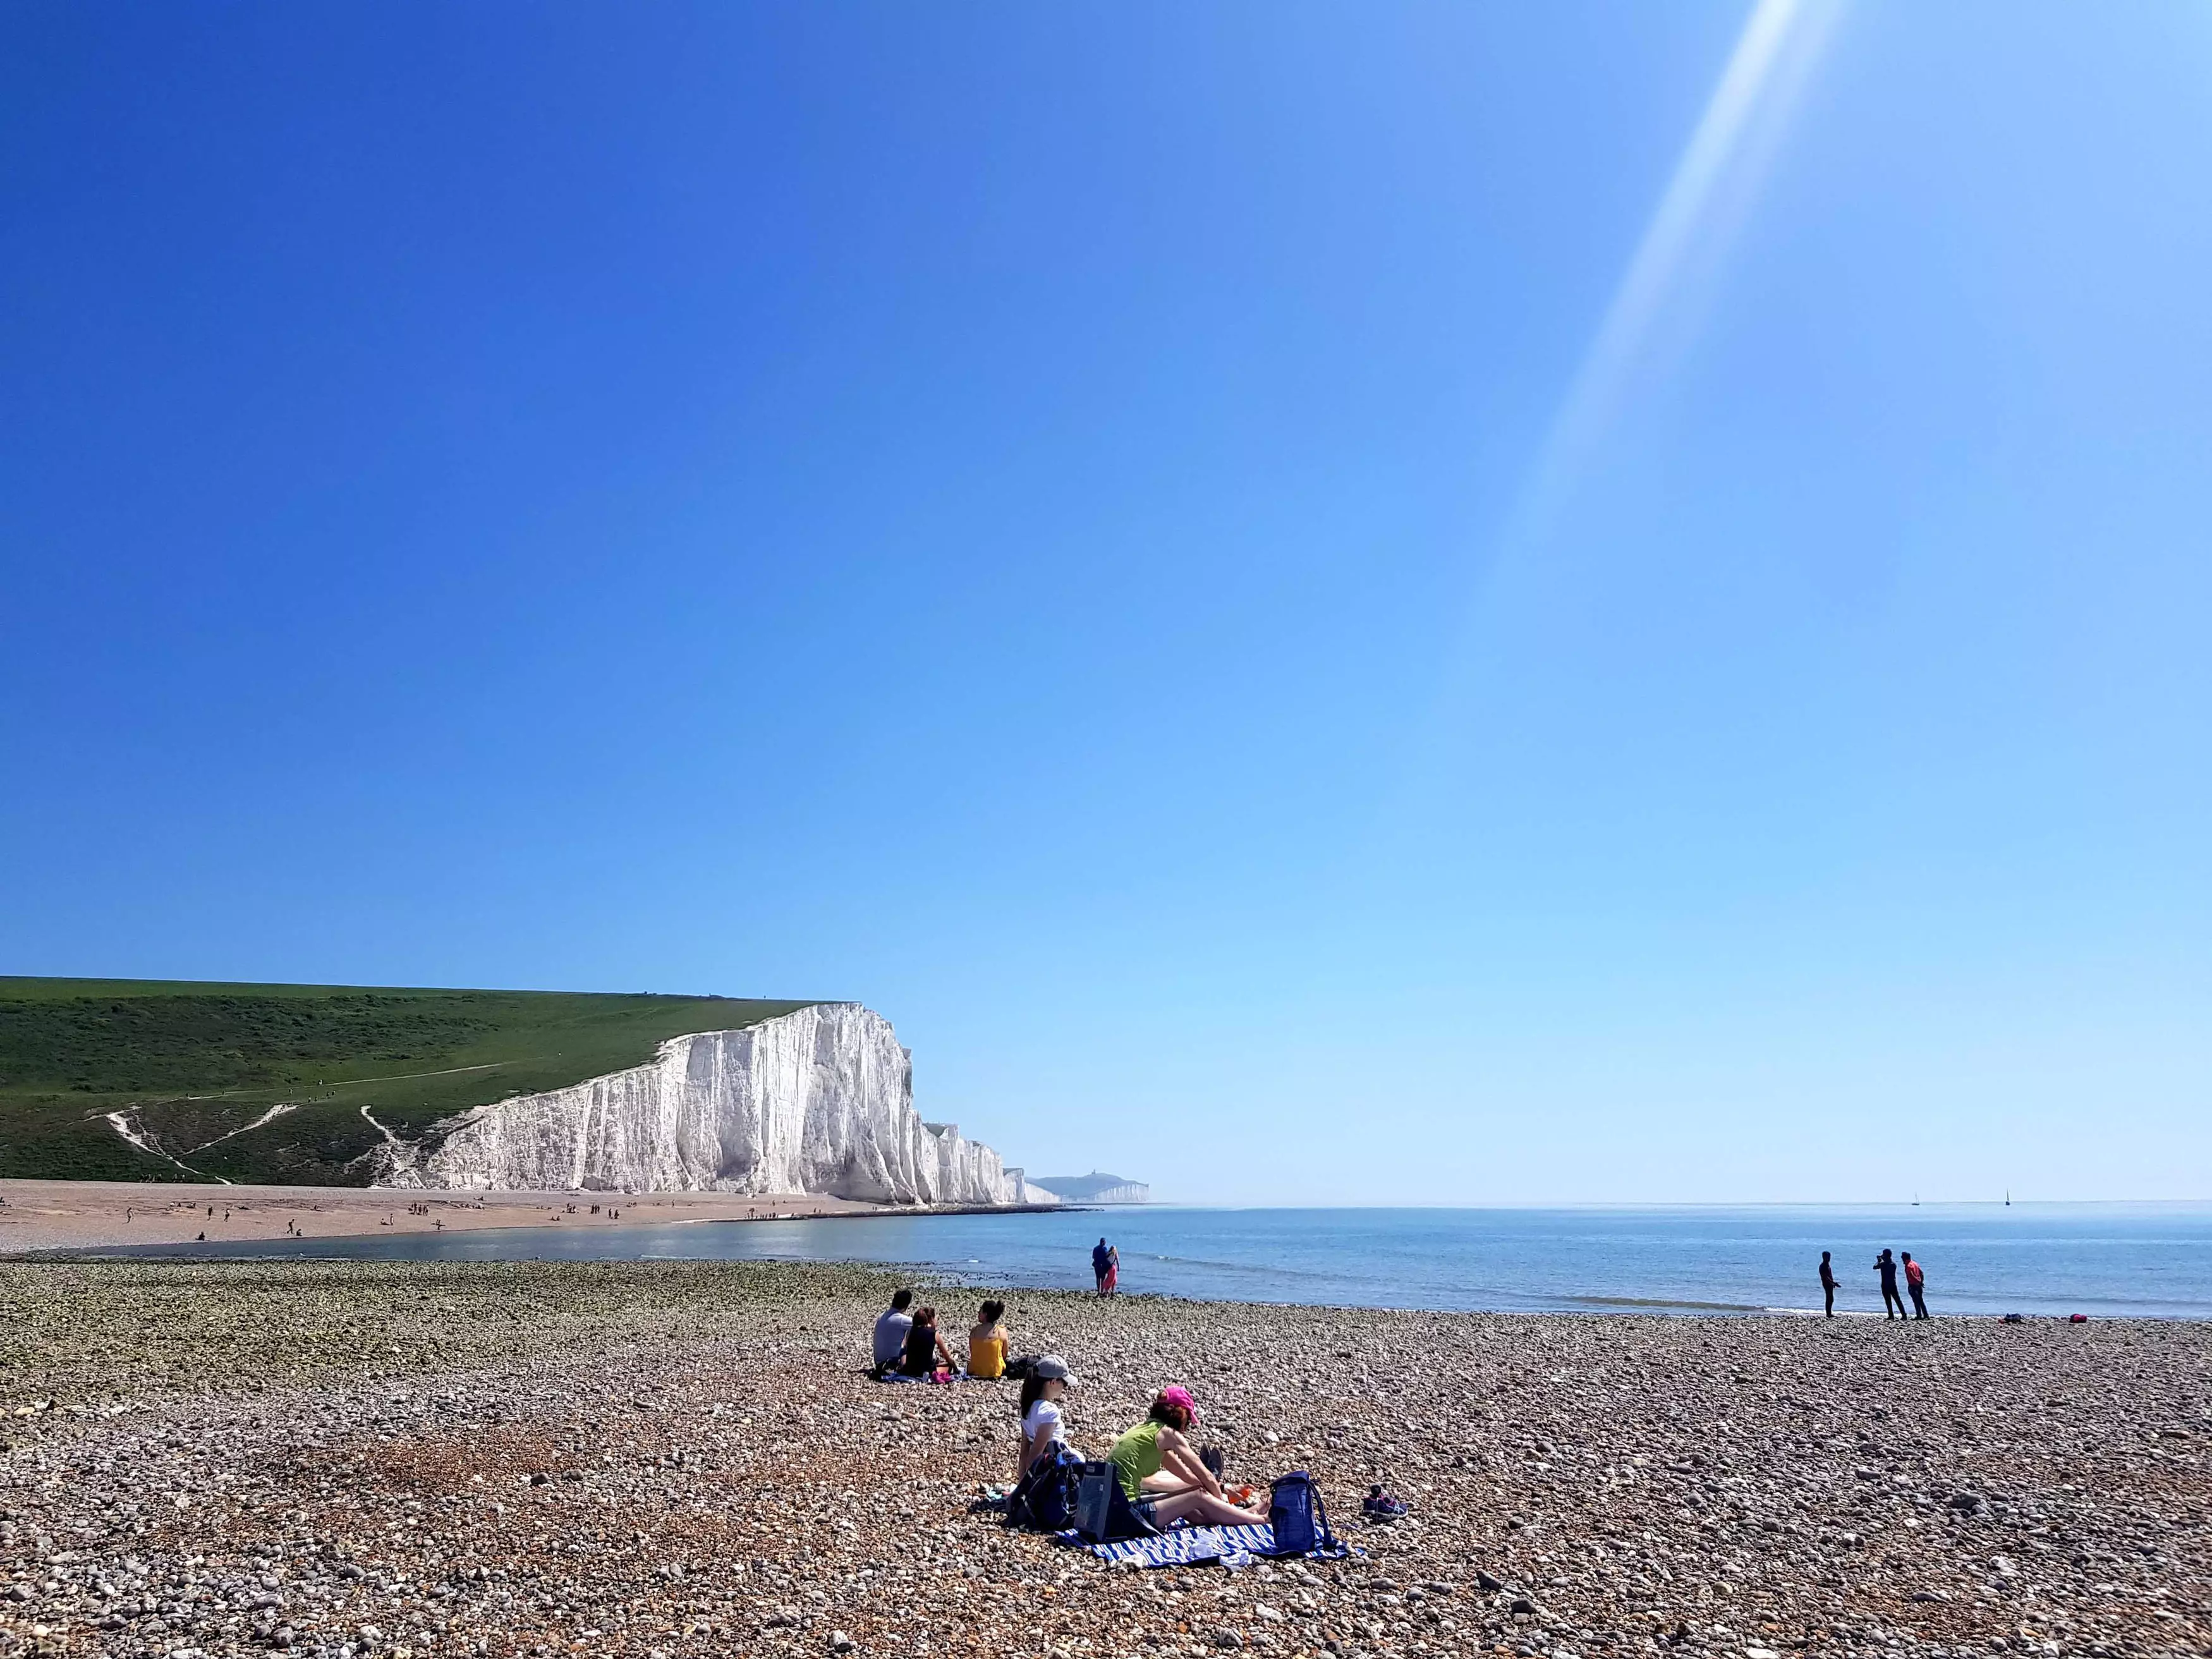 Many people chose to visit the Seven Sisters cliffs over the hot Easter weekend.